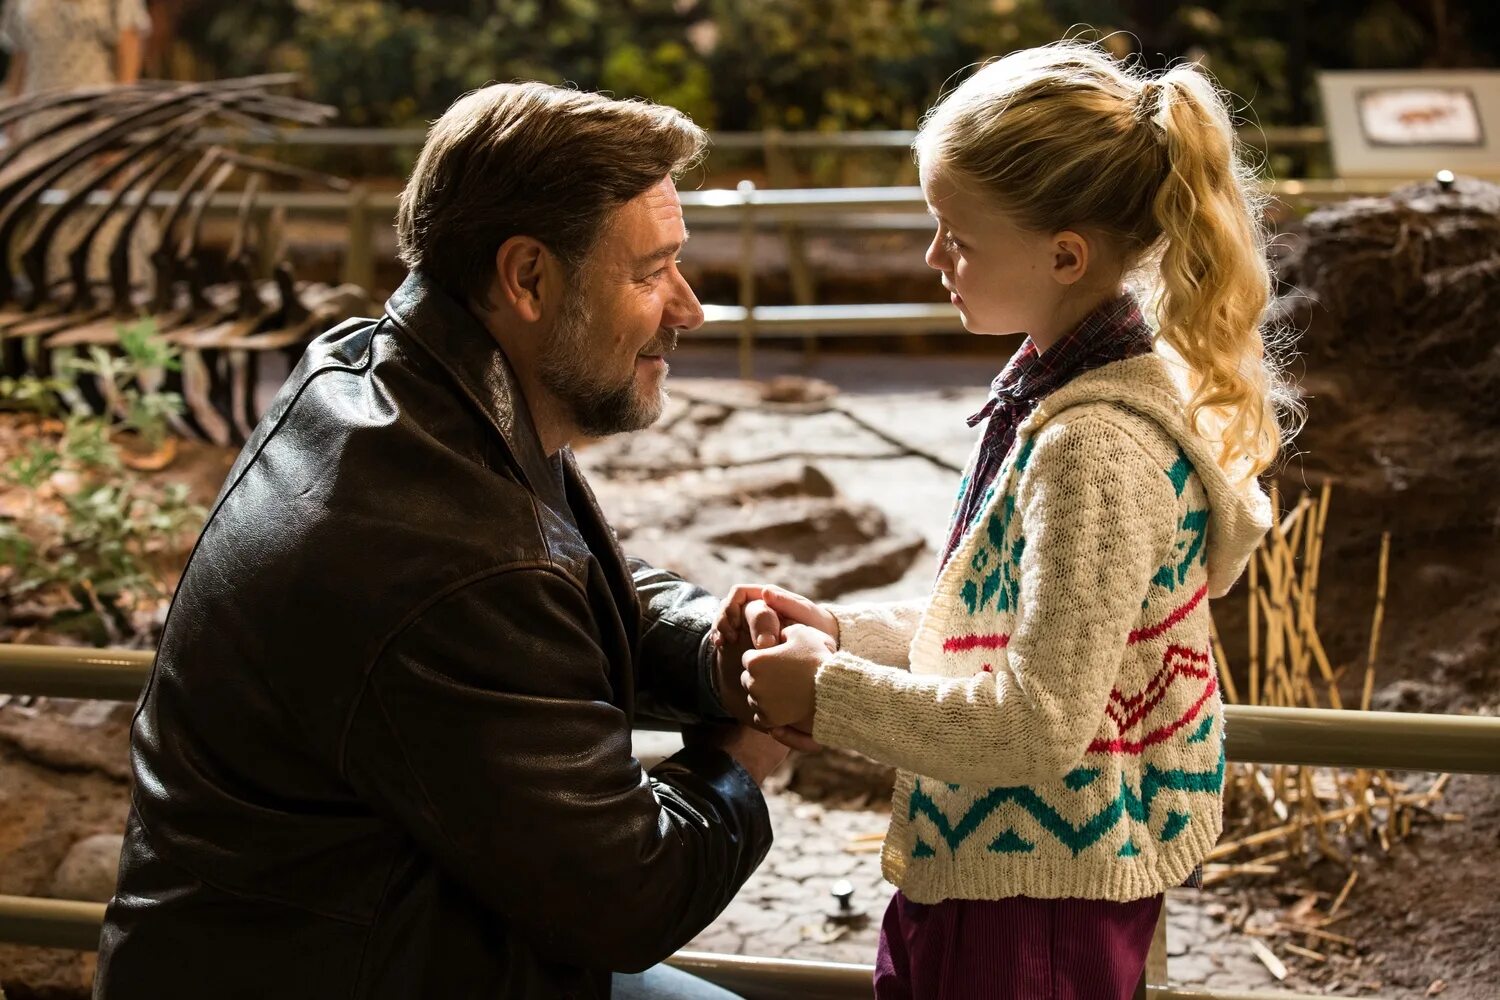 Fathers and daughters (2015) Russell Crowe. Рассел Кроу отцы и дочери. Рассел Кроу 2015. Русская дочка папа 18